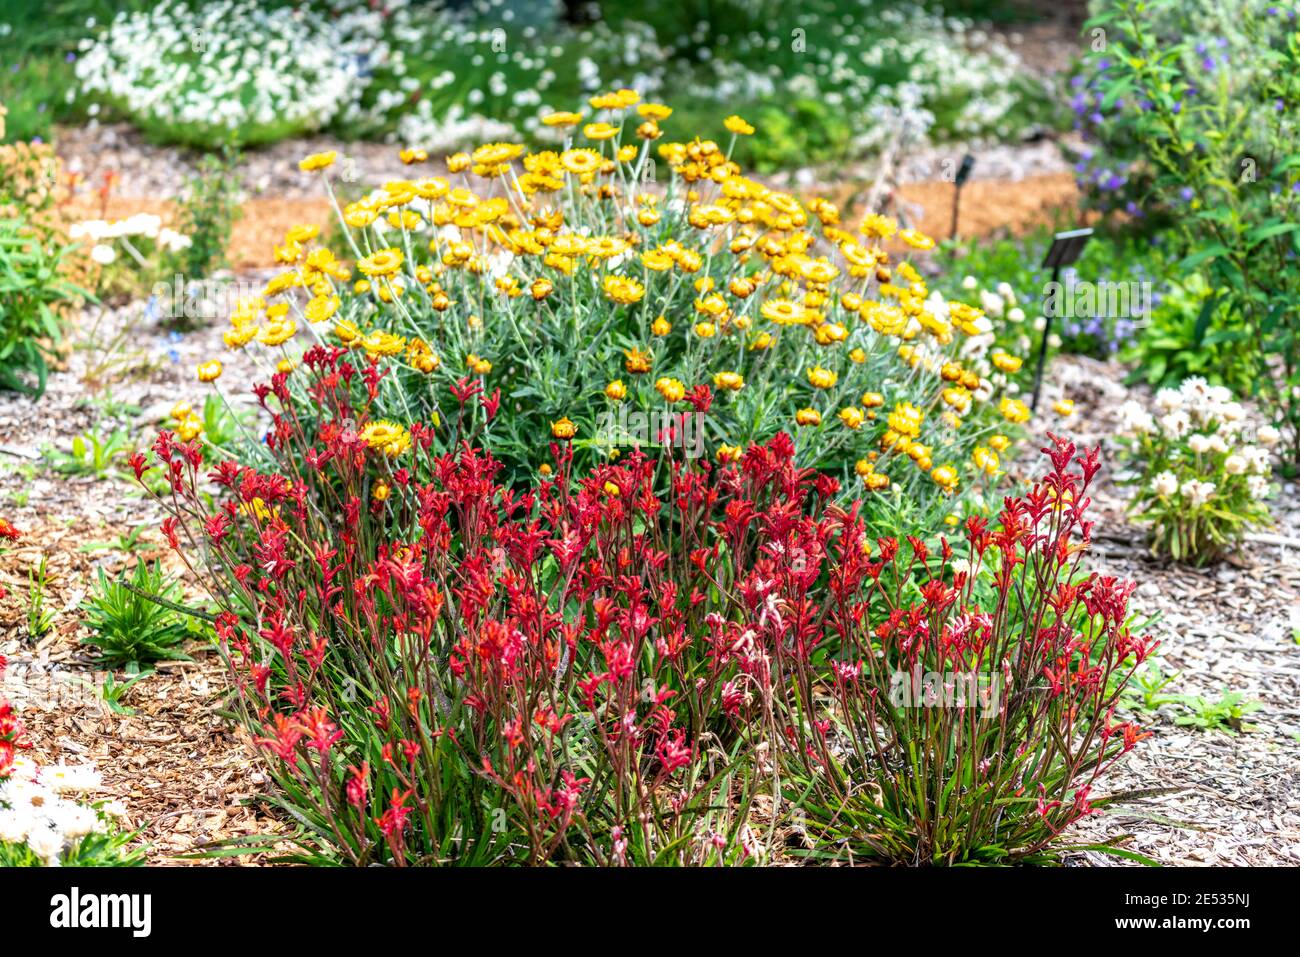 Red Kangaroo Paw Plants in front of Yellow Daises  in an Australian garden setting Stock Photo